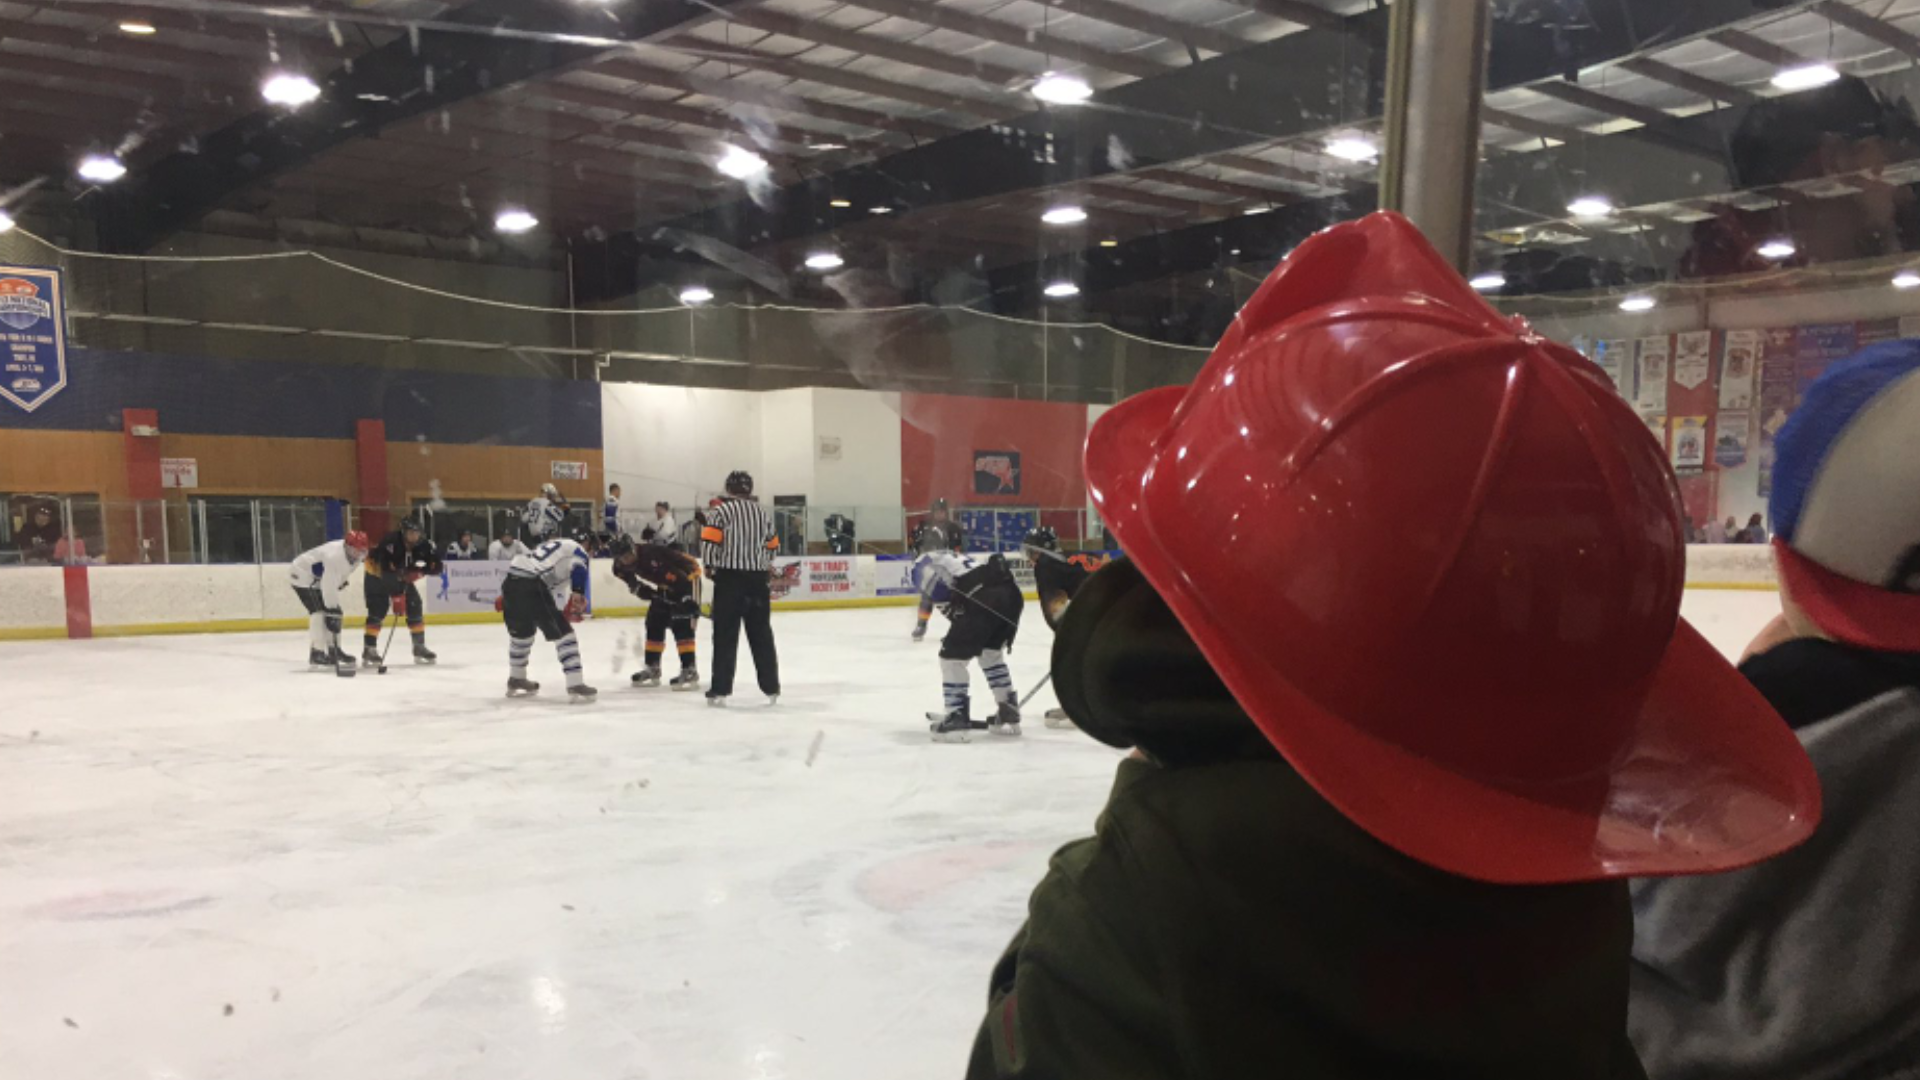 Greensboro Fire and police pucked it up in their annual Guns and Hoses charity hockey game. The event raises money for the Special Olympics of North Carolina.